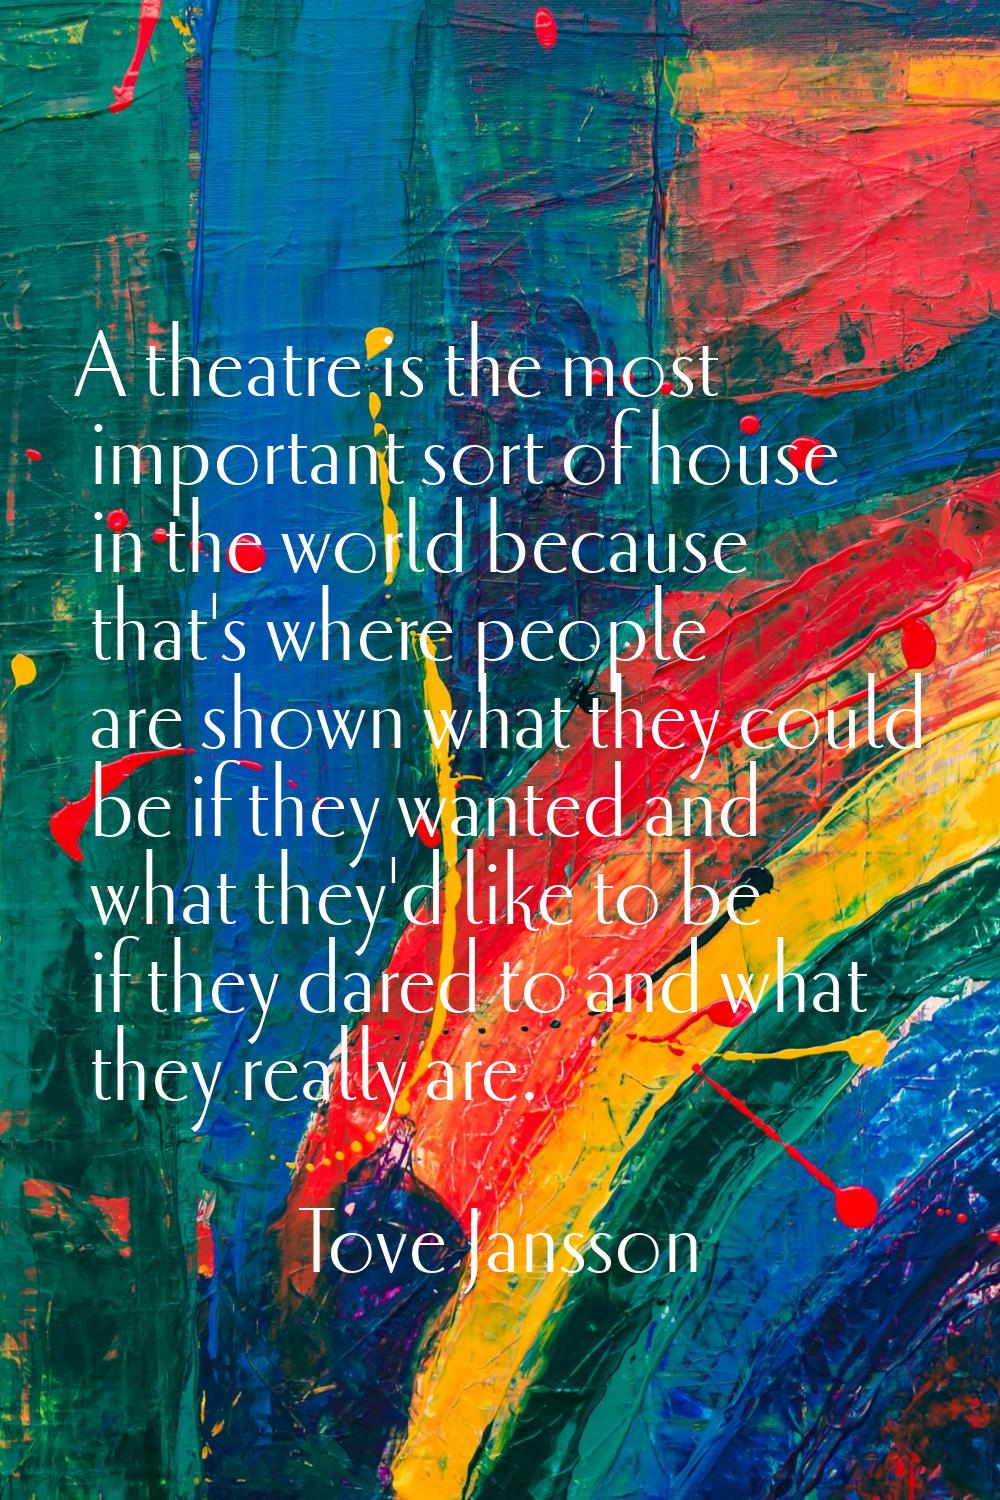 A theatre is the most important sort of house in the world because that's where people are shown wh